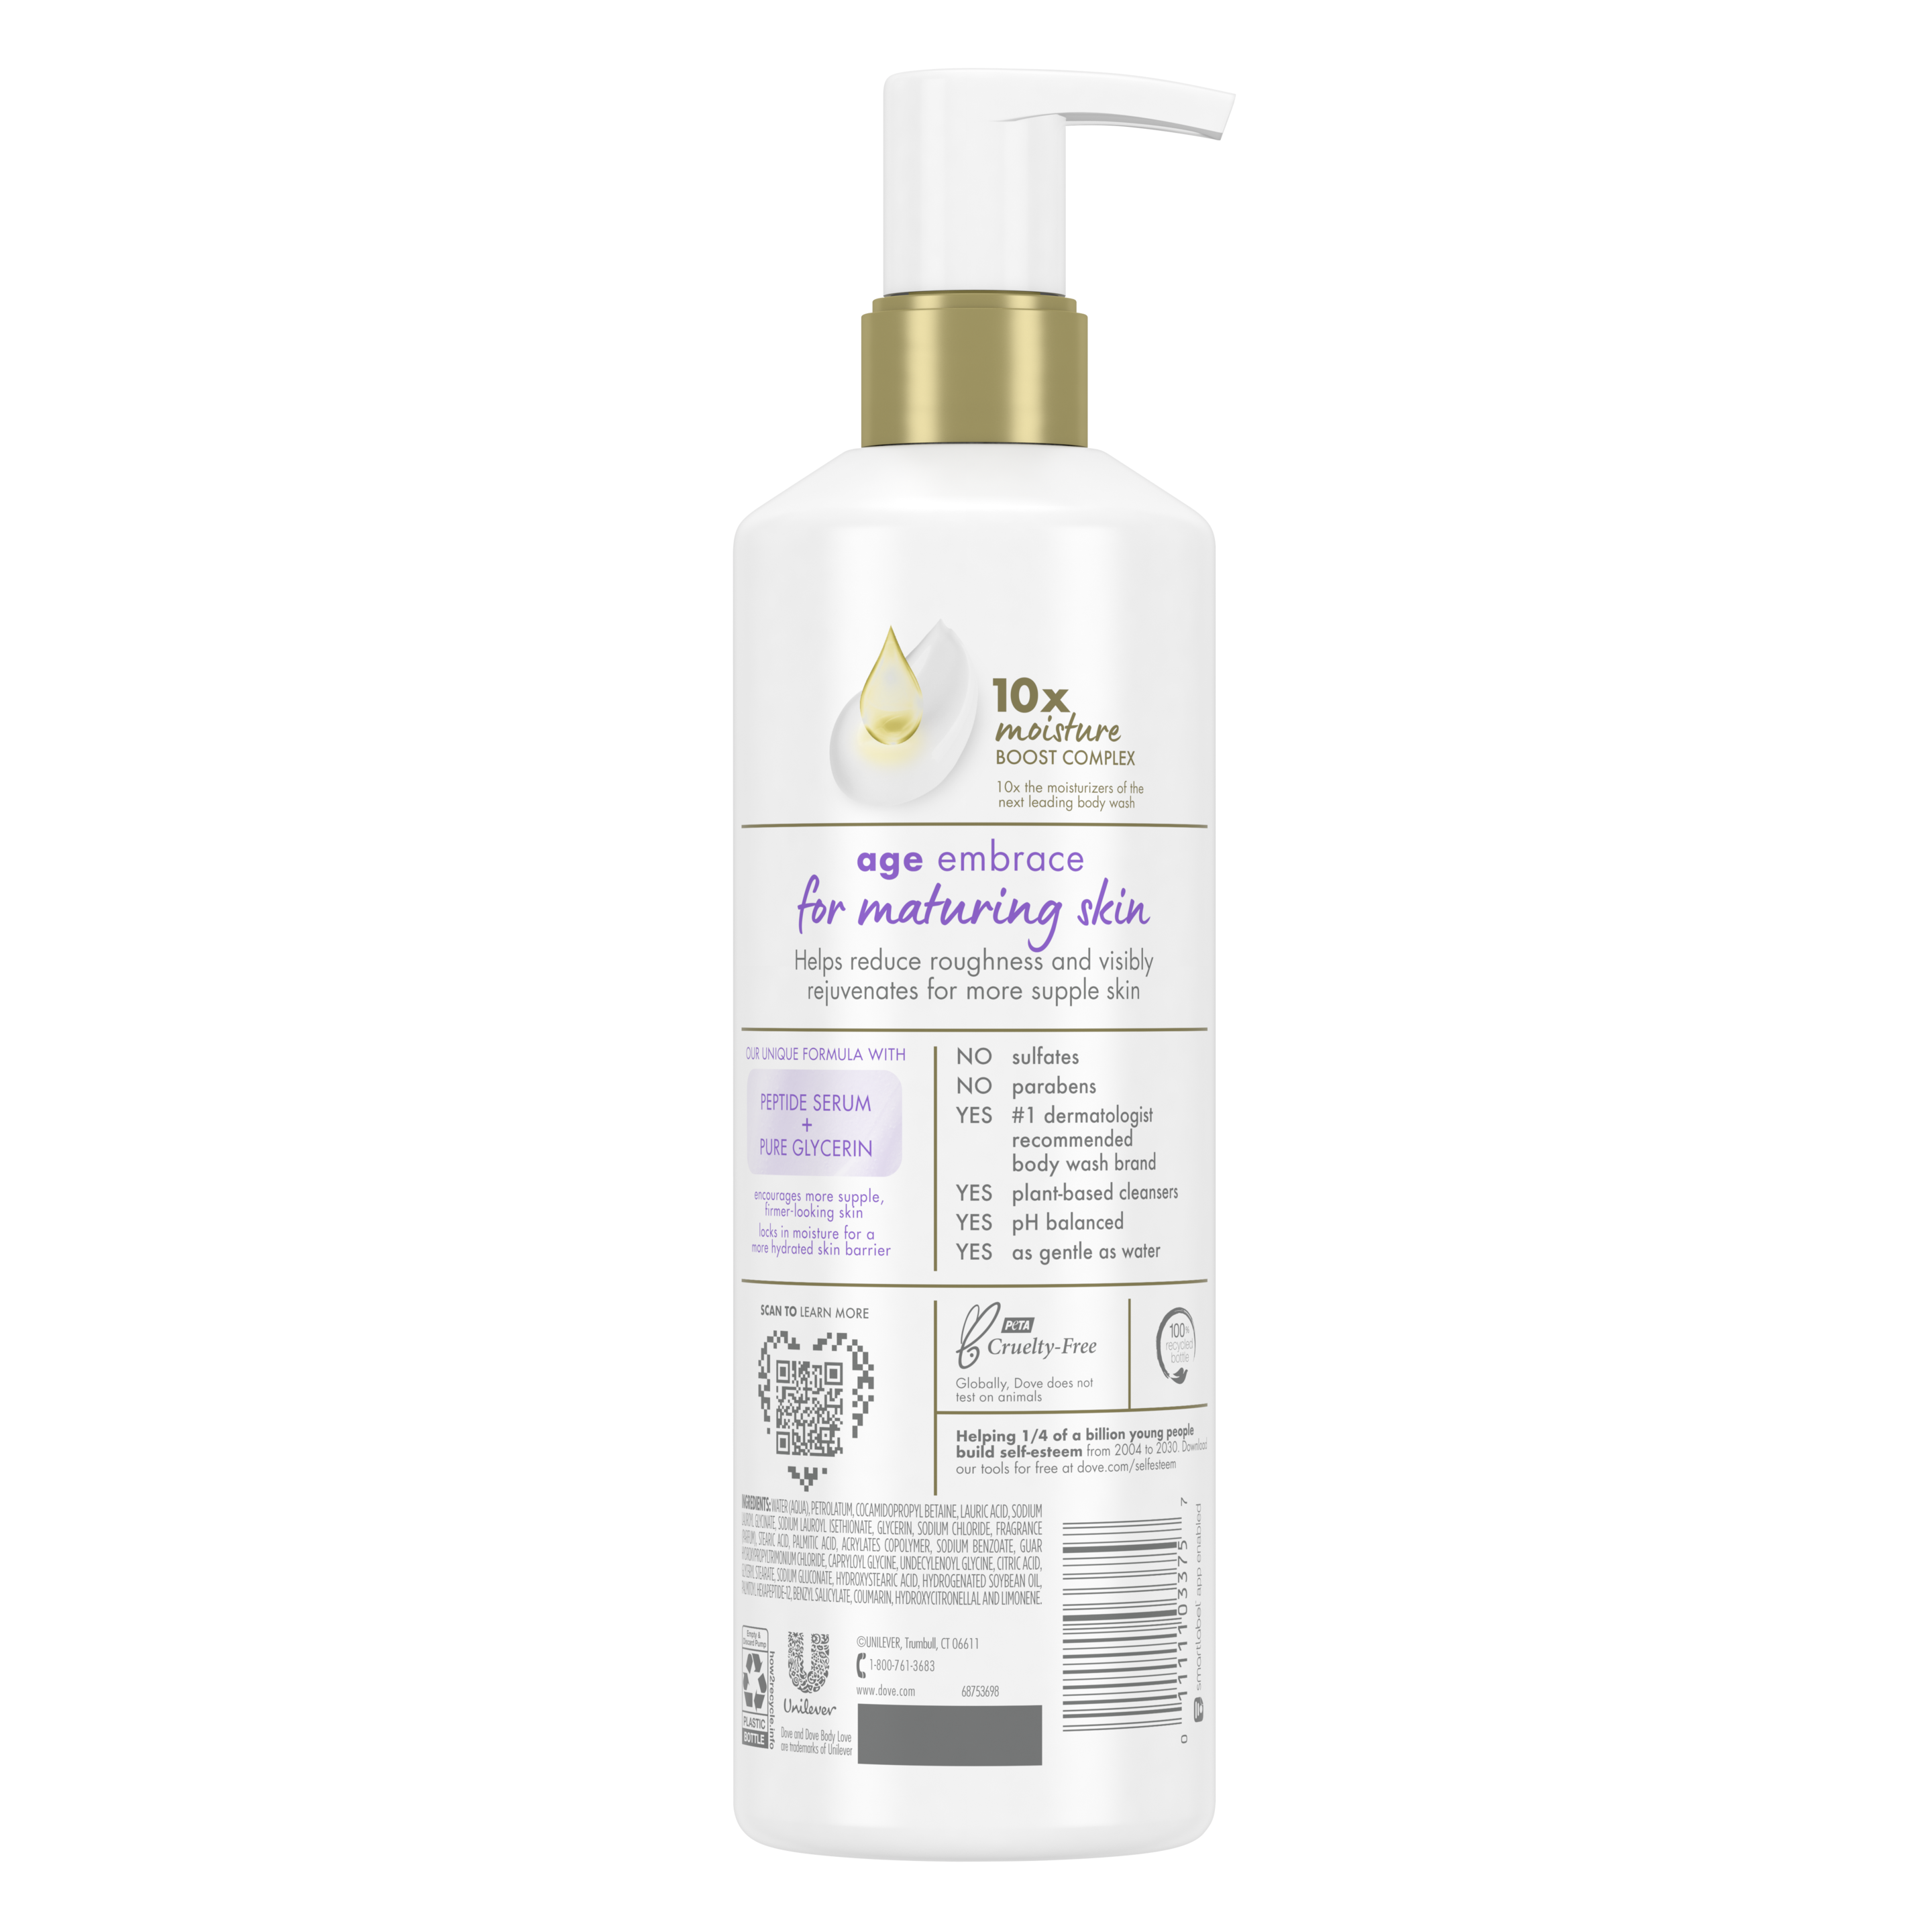 Body Love Age Embrace Body Cleanser